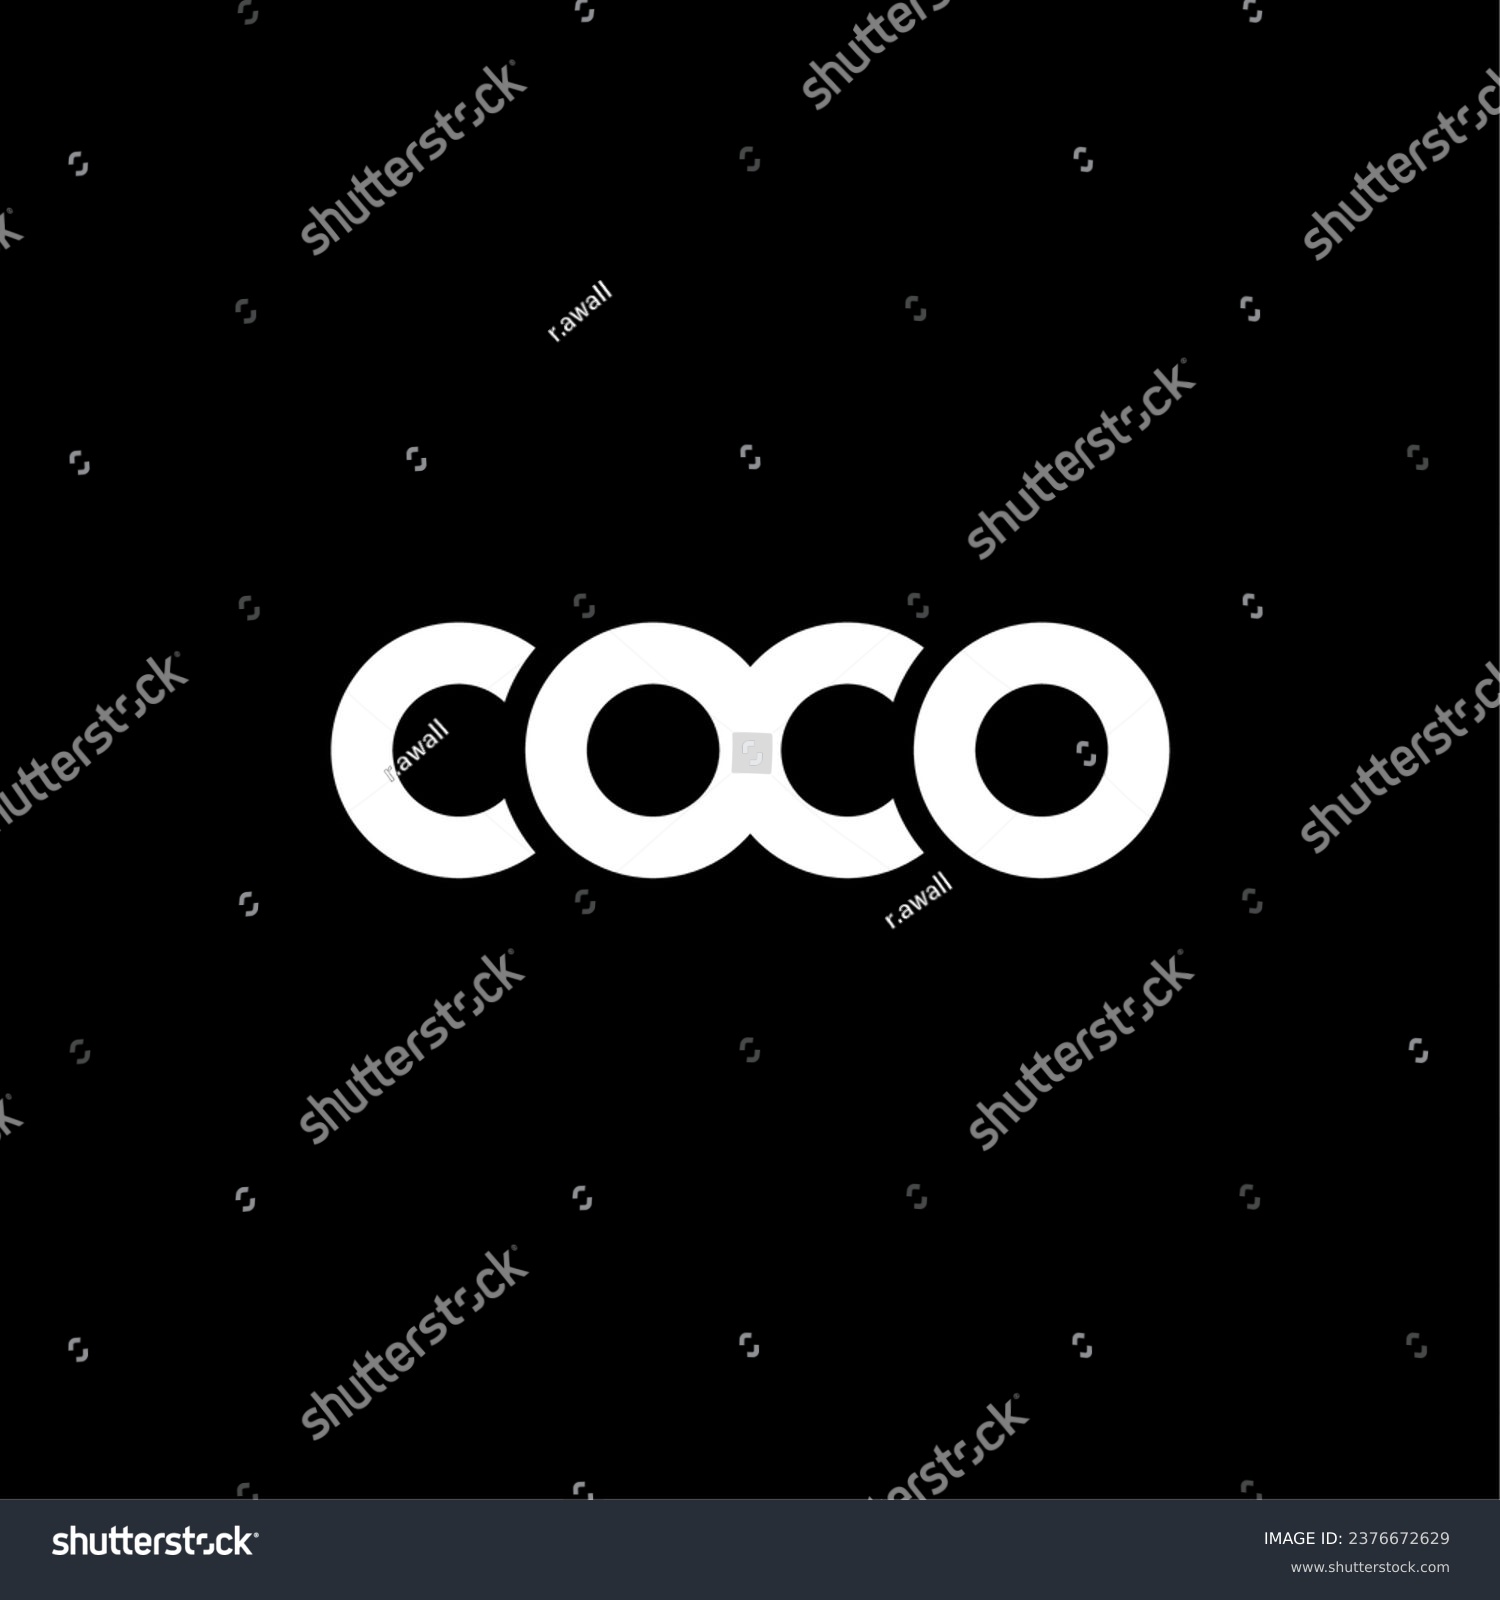 SVG of COCO LOGO VECTOR, for Accounting and Finance, Construction, Real Estate and Mortgage, Technology and other companies. Thank You svg